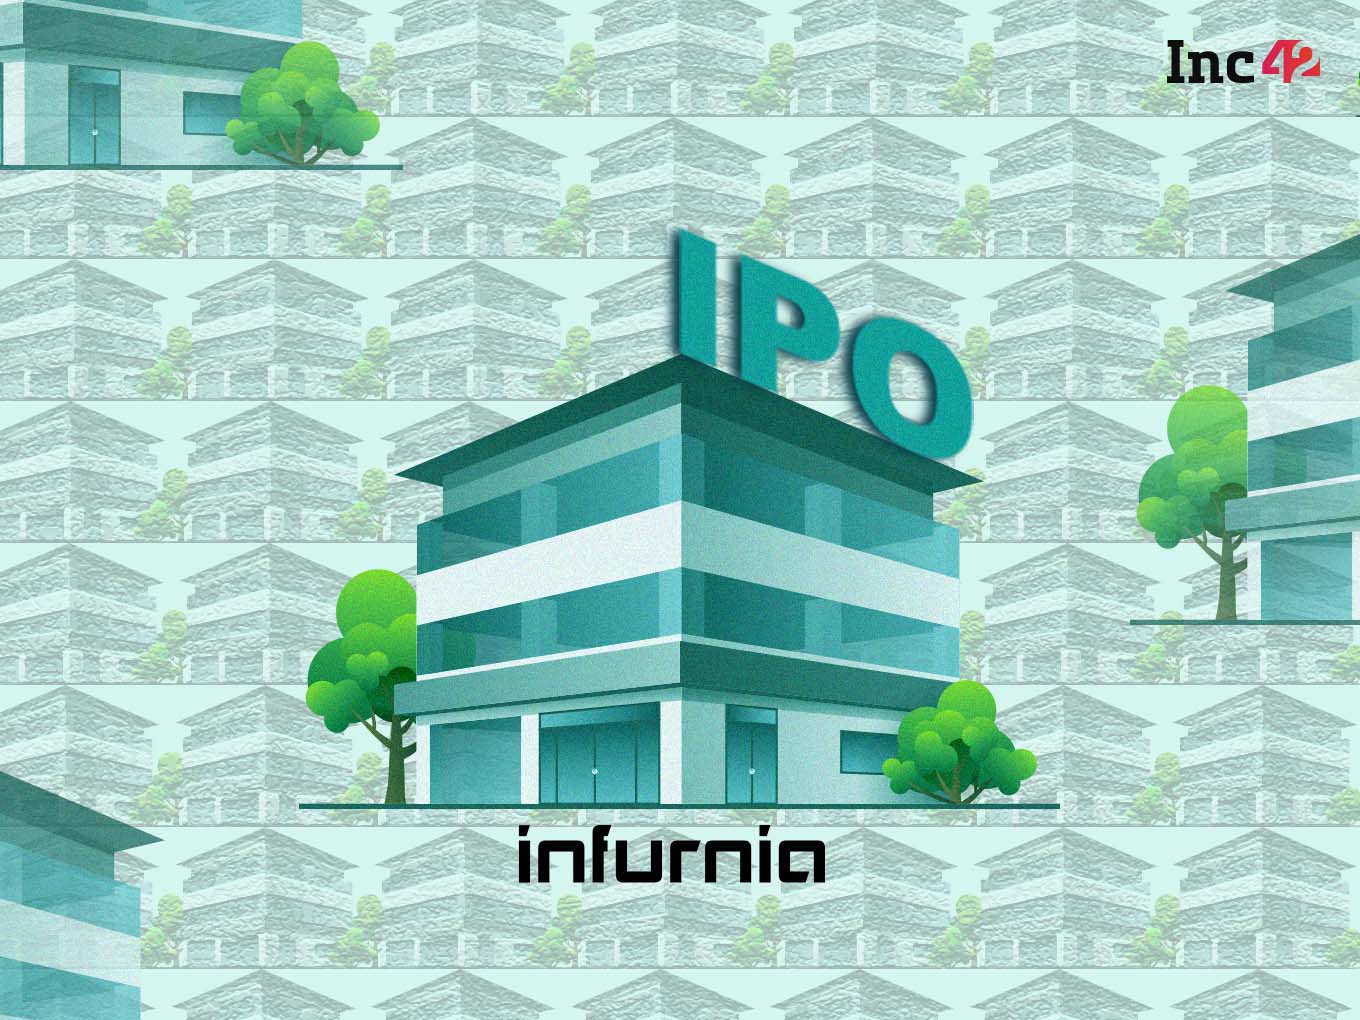 Infurnia Technologies To File INR 40 Cr IPO On BSE Startup Platform Summary Infurnia offers cloud-native architecture design software for professionals and businesses According to the startup, “Infurnia is to Autodesk what Google Docs is to Microsoft Office,” The global market for construction and design software is projected to reach $18.18 Bn by 2028, growing at a CAGR of 7.7% between 2021 and 2028 Cloud-based architectural design software startup Infurnia Technologies is planning to raise INR 40 Cr in an initial public offering (IPO) on the BSE Startup Platform.